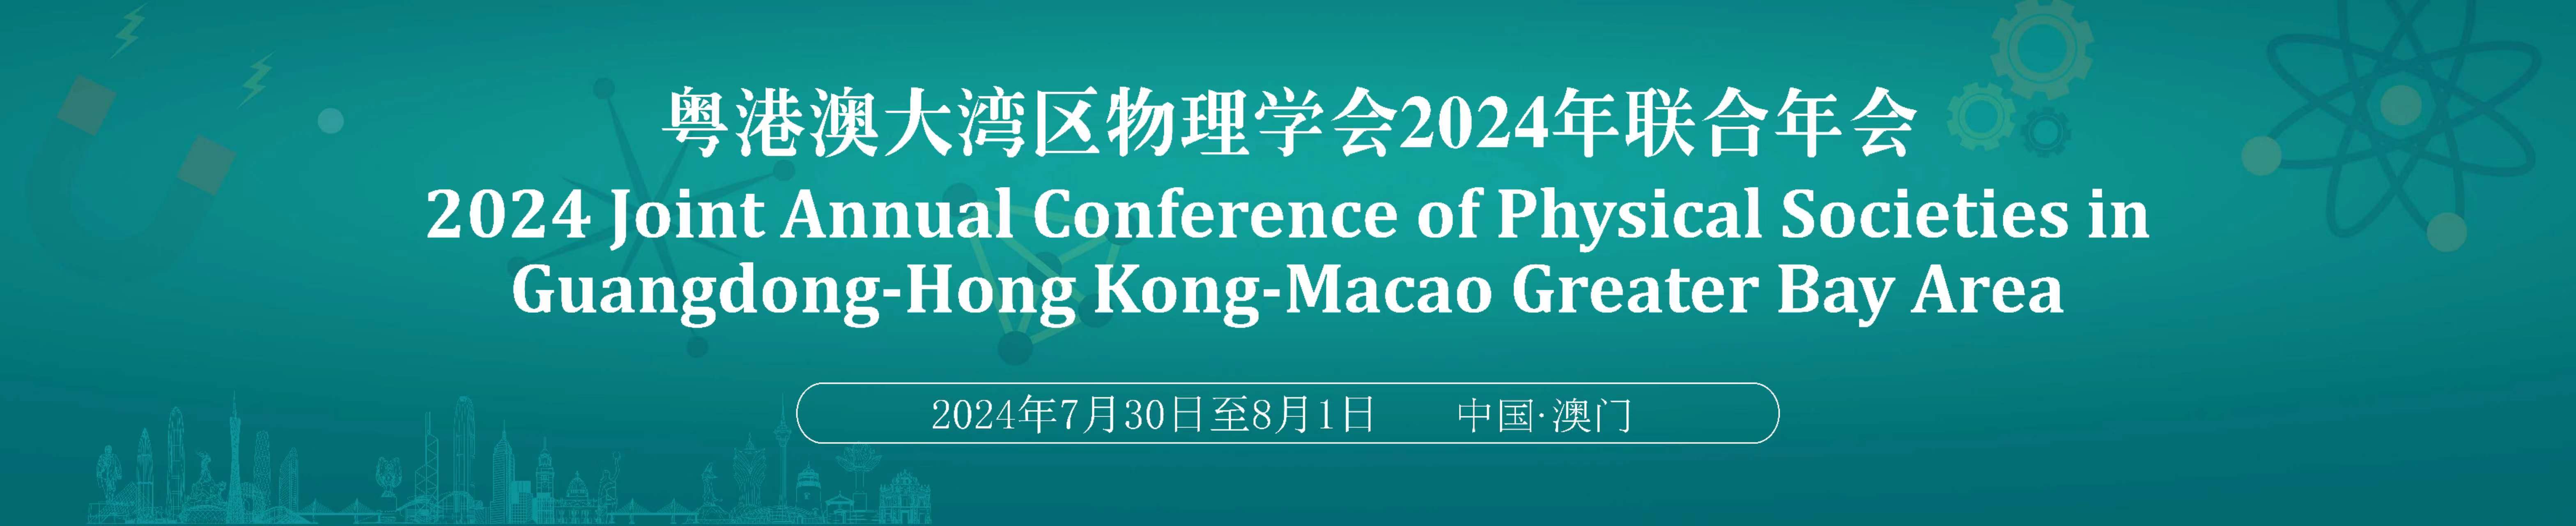 2024 Joint Annual Conference of Physical Societies in Guangdong-Hong Kong-Macao Greater Bay Area